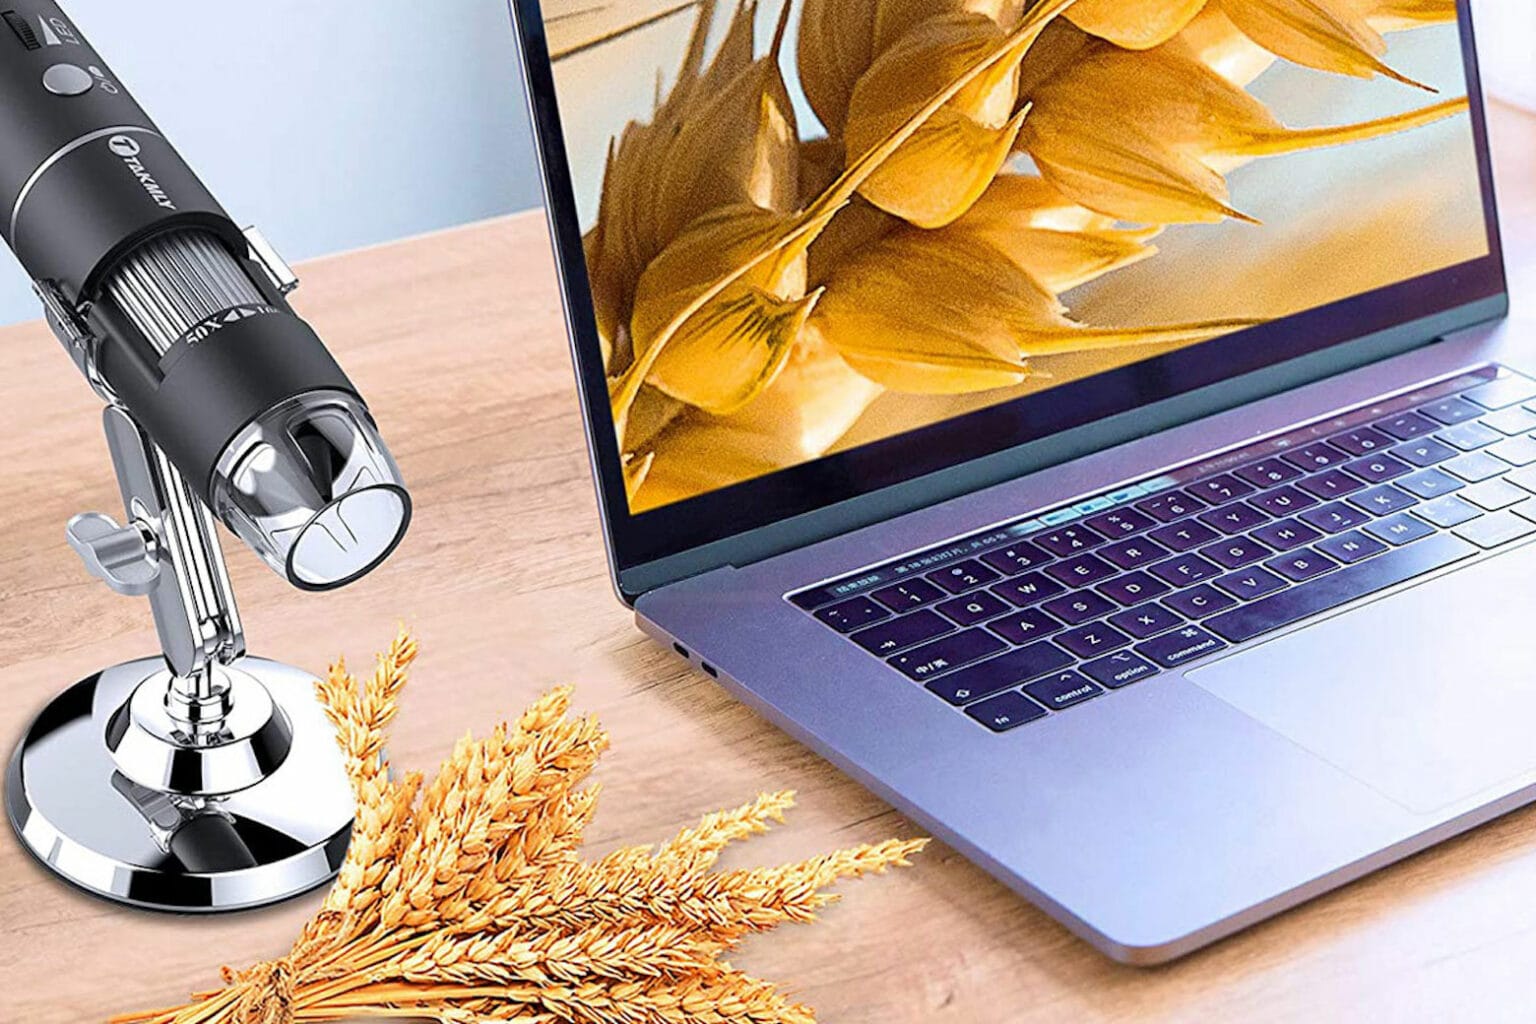 Grab this awesome digital microscope which connects to your phone on sale with 20% off now.